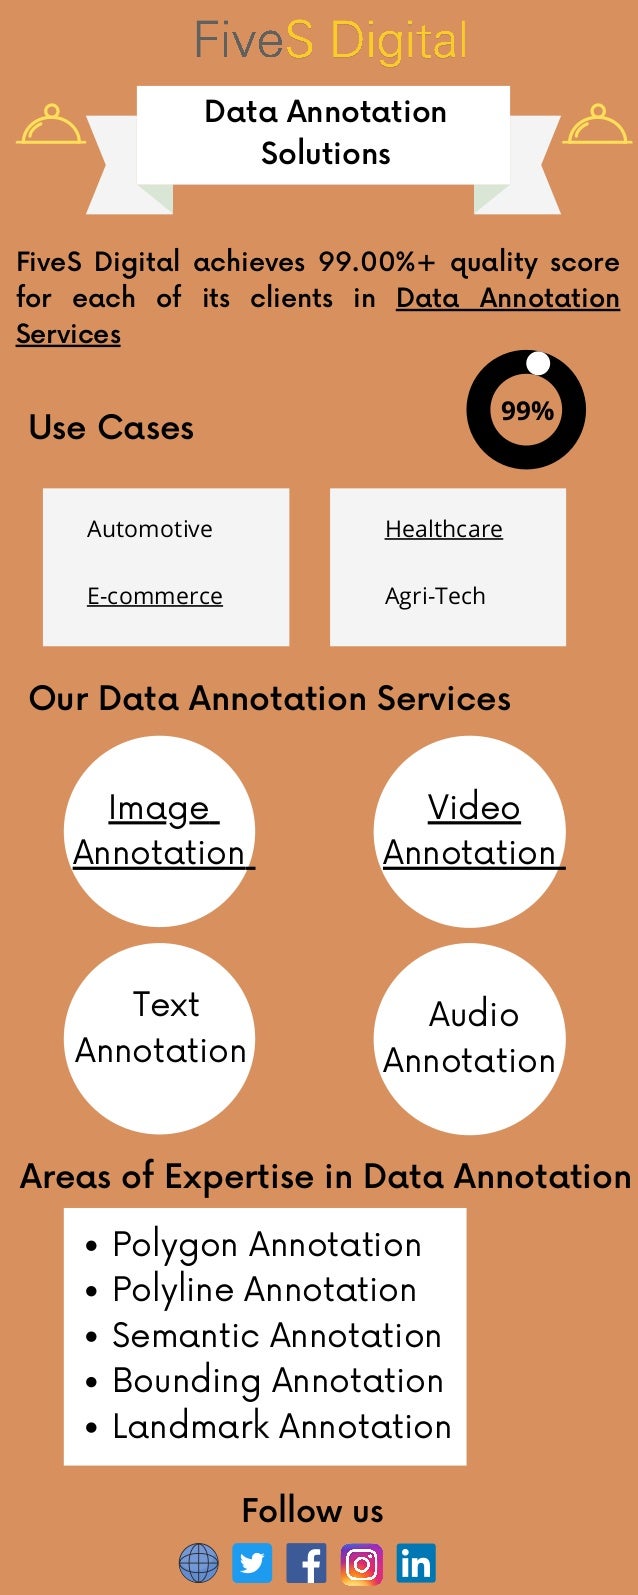 Data Annotation
Solutions
FiveS Digital achieves 99.00%+ quality score
for each of its clients in Data Annotation
Services
99%
Use Cases
Automotive
E-commerce Agri-Tech
Healthcare
Our Data Annotation Services
Image
Annotation
Video
Annotation
Text
Annotation
Audio
Annotation
Polygon Annotation
Polyline Annotation
Semantic Annotation
Bounding Annotation
Landmark Annotation
Areas of Expertise in Data Annotation
Follow us
 